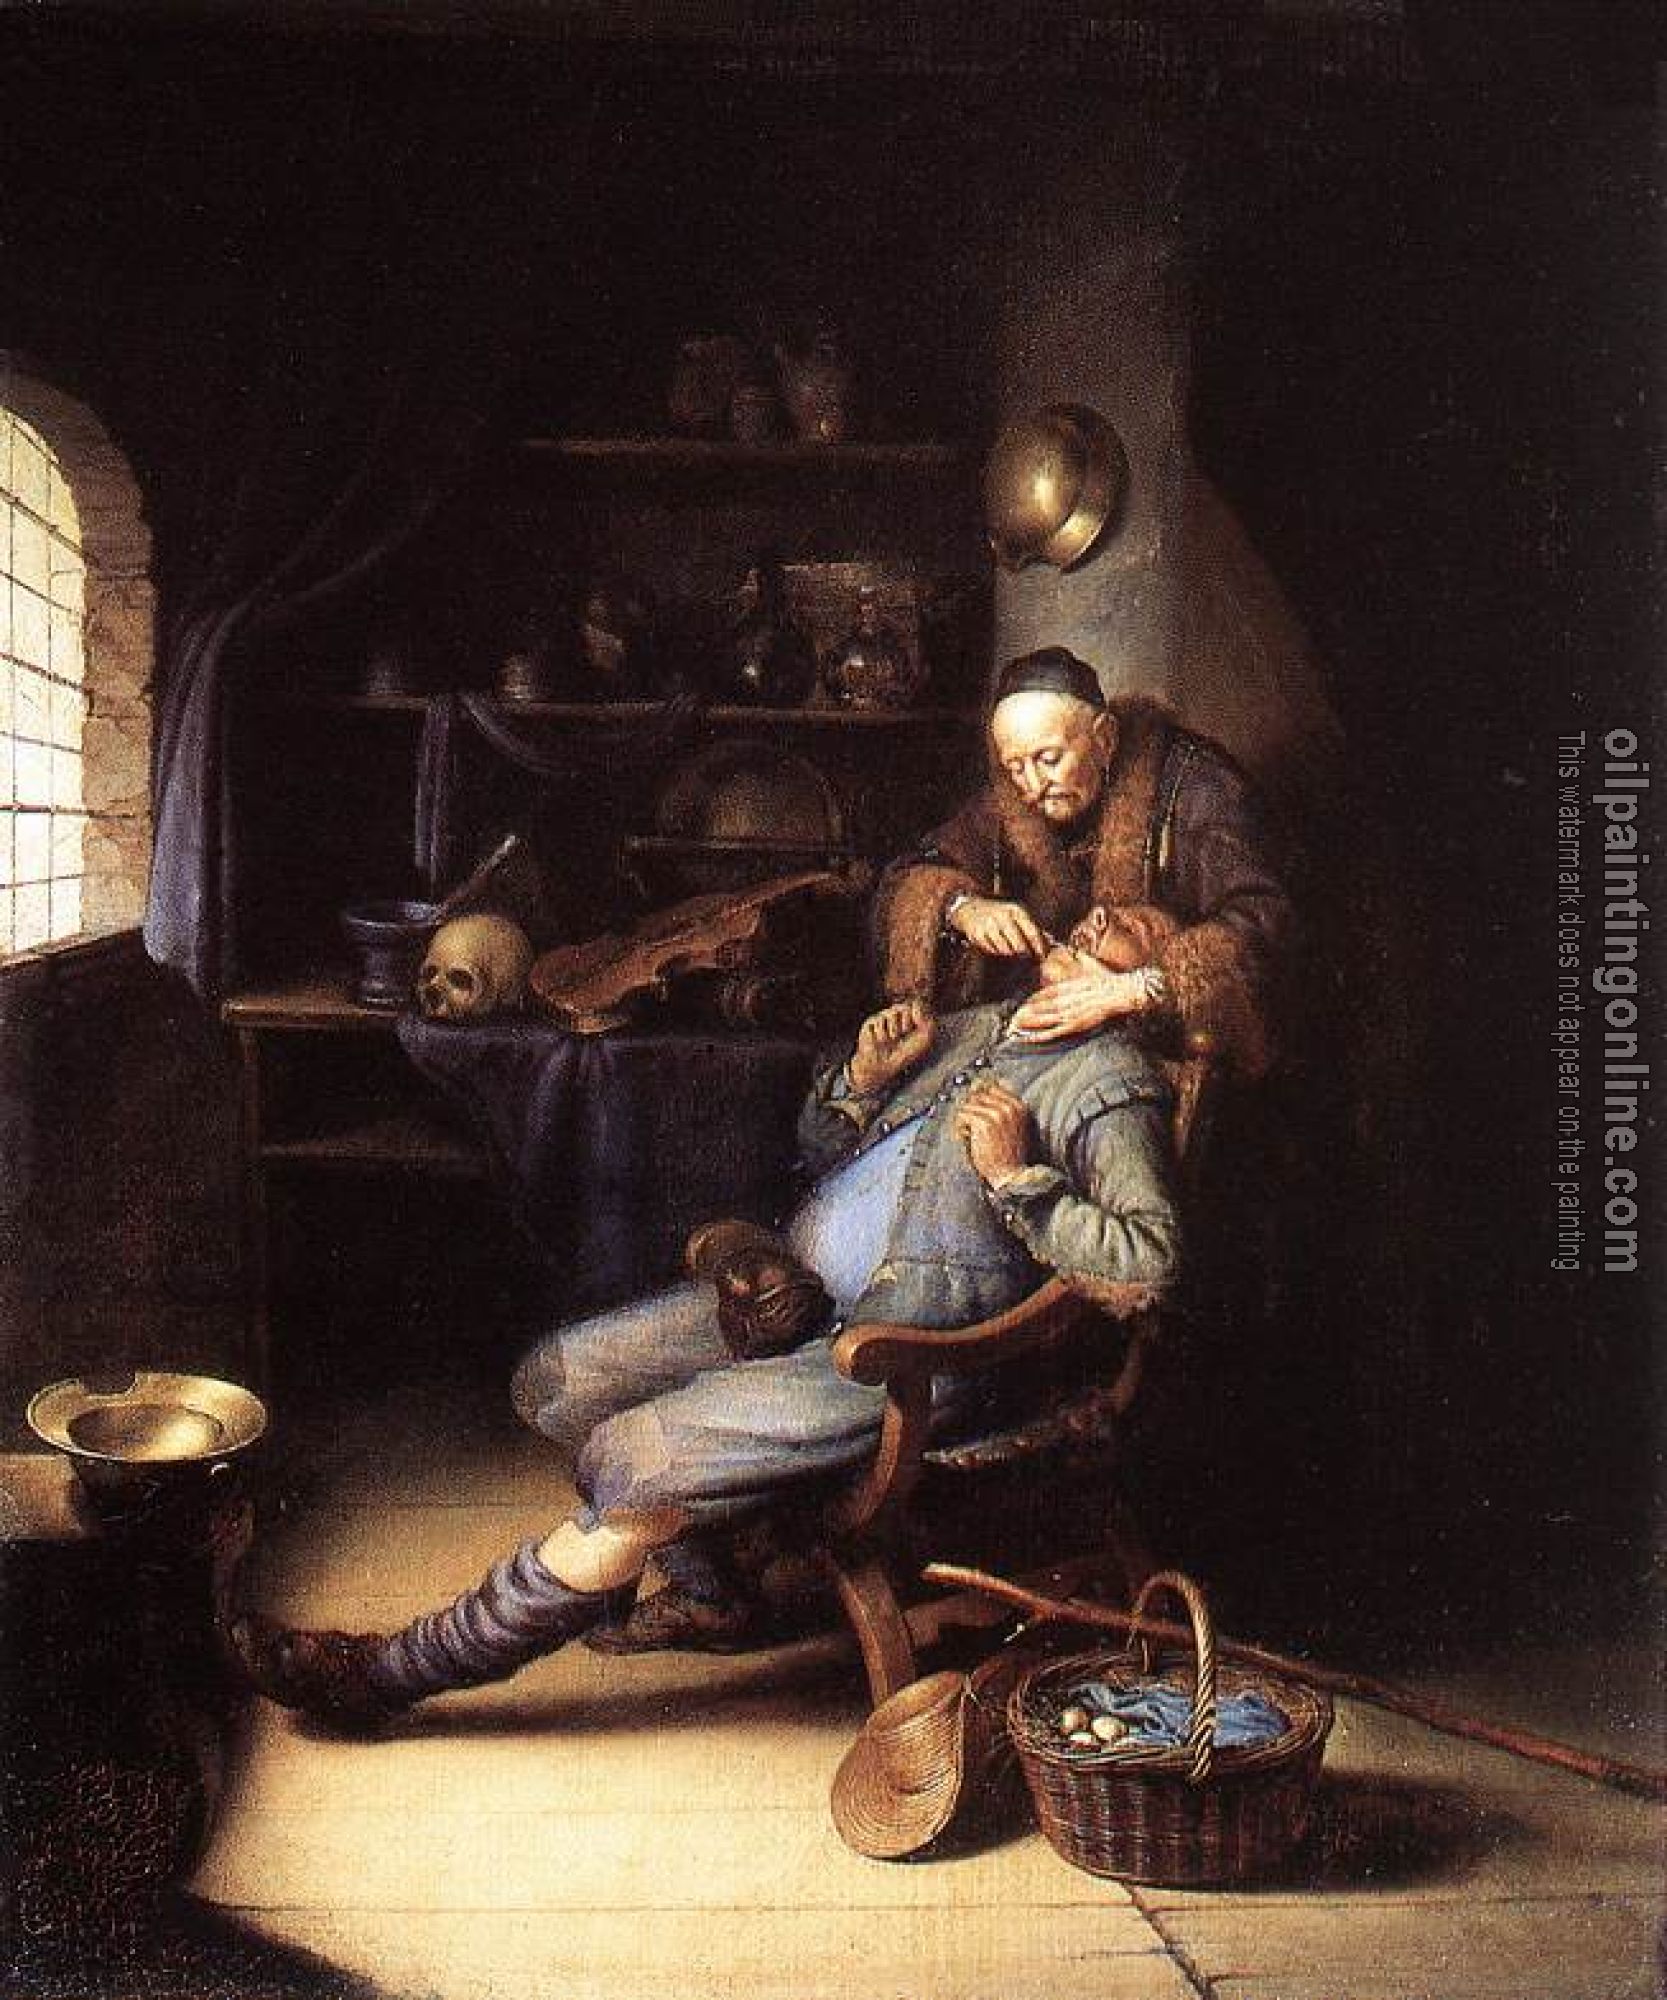 Dou, Gerrit - The Extraction of Tooth